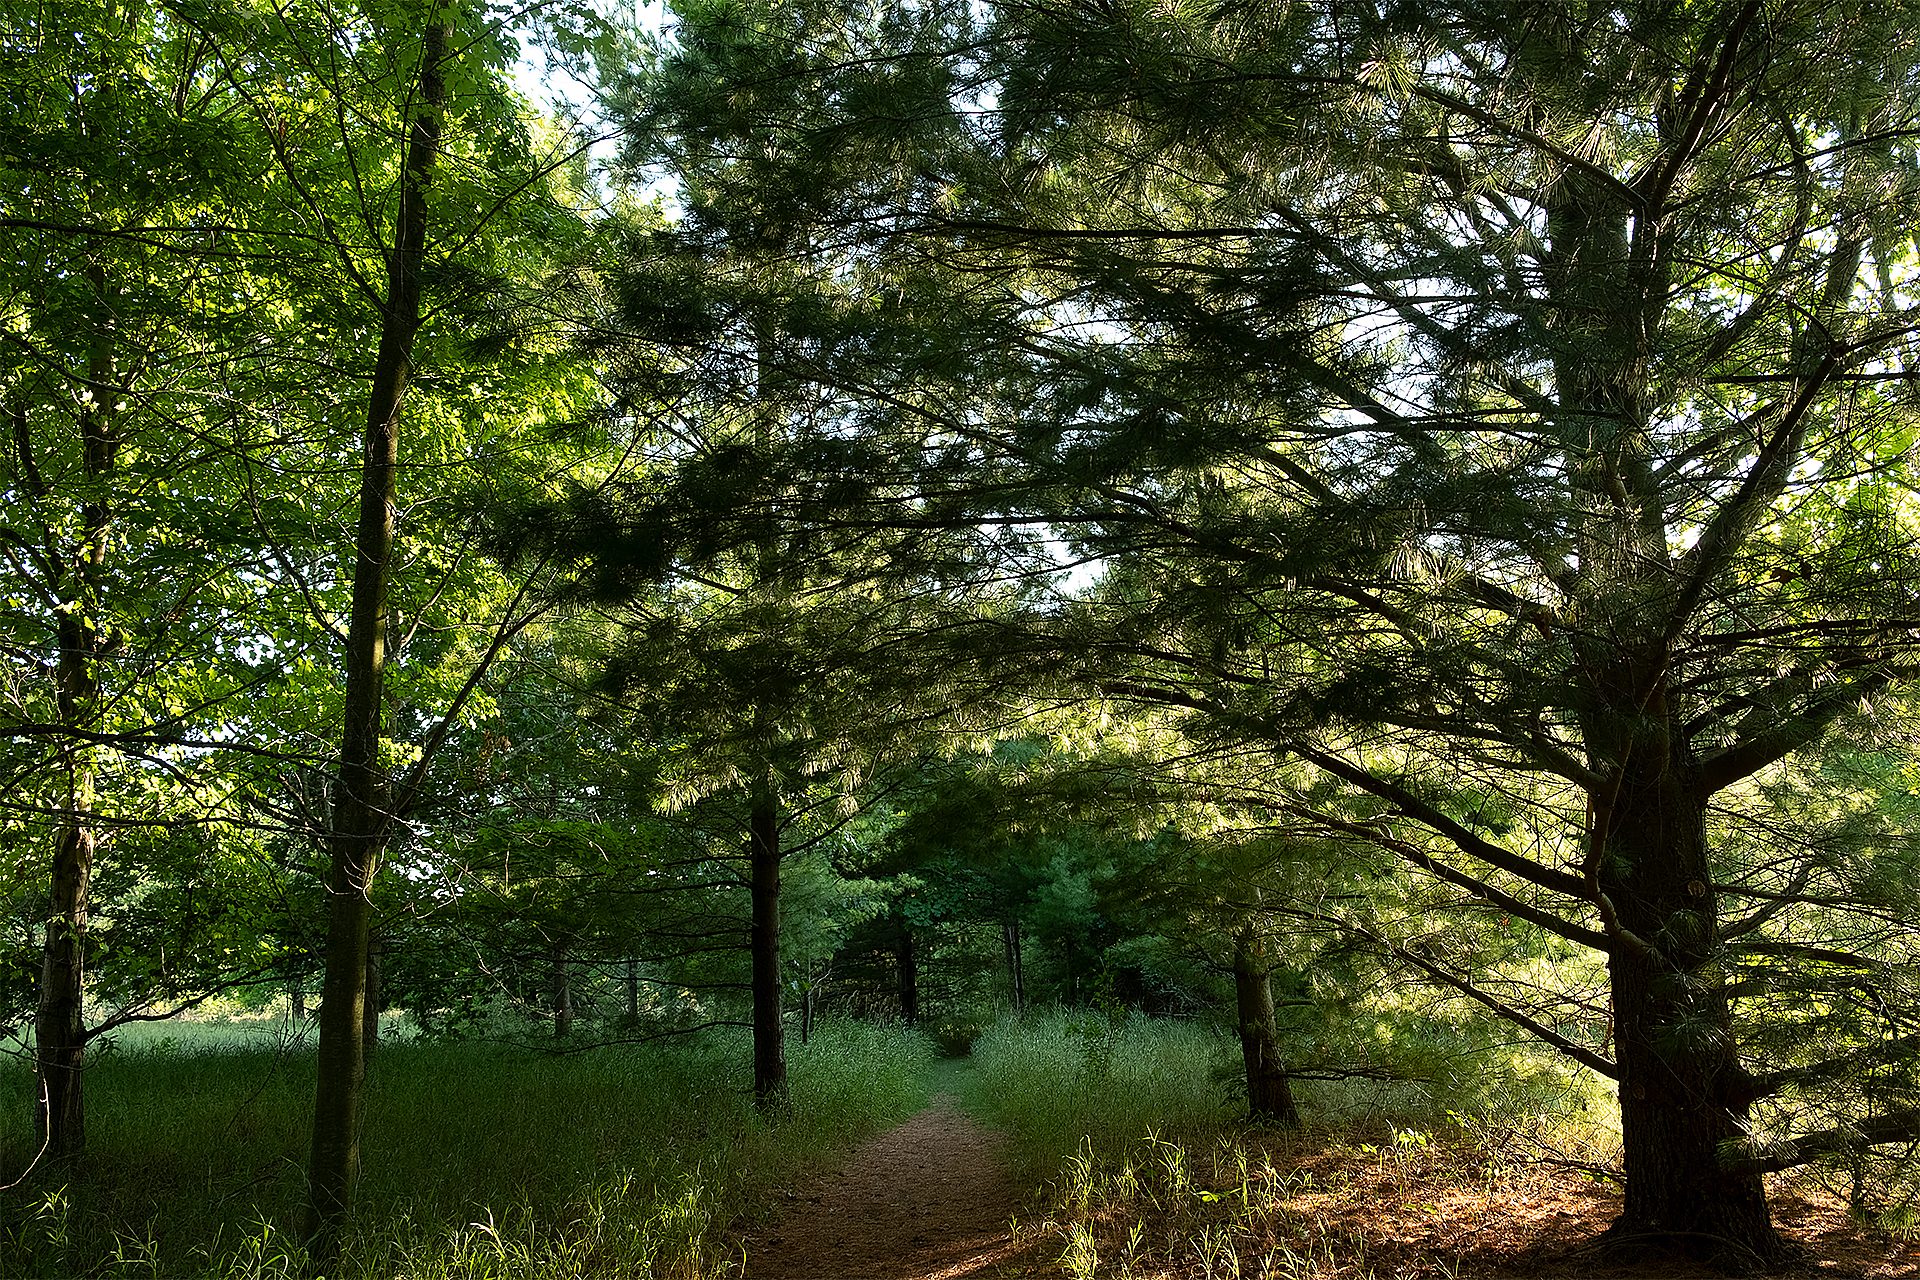 Colour photograph of trees and a trail  with sunlight filtering from the background.